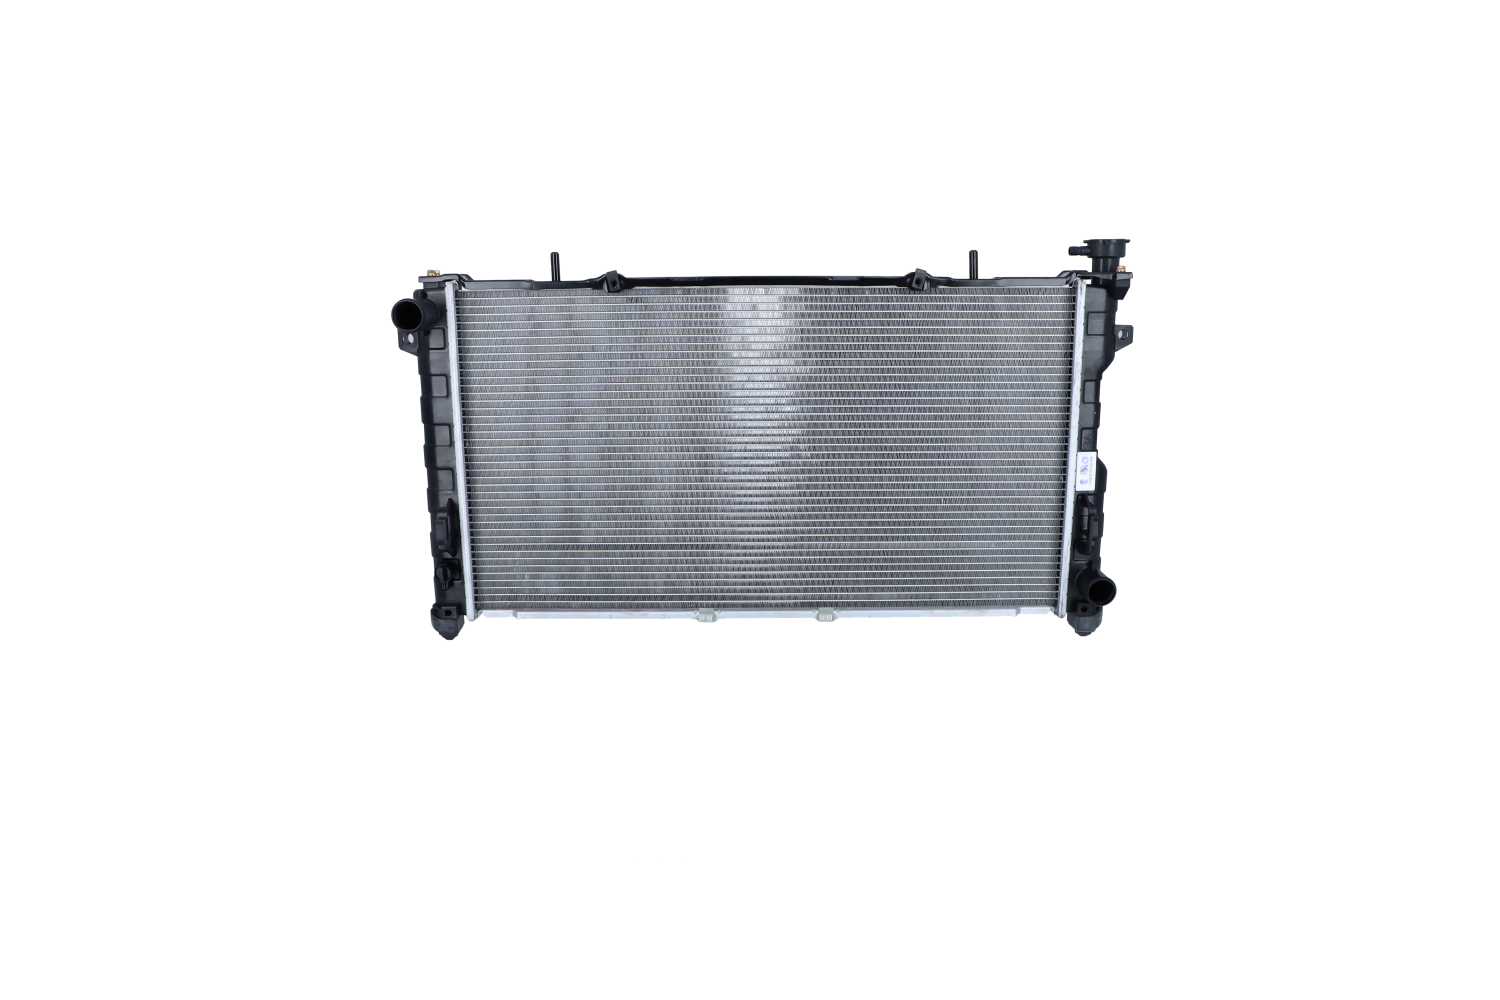 NRF 53156 Engine radiator Aluminium, 768 x 415 x 27 mm, with mounting parts, Brazed cooling fins